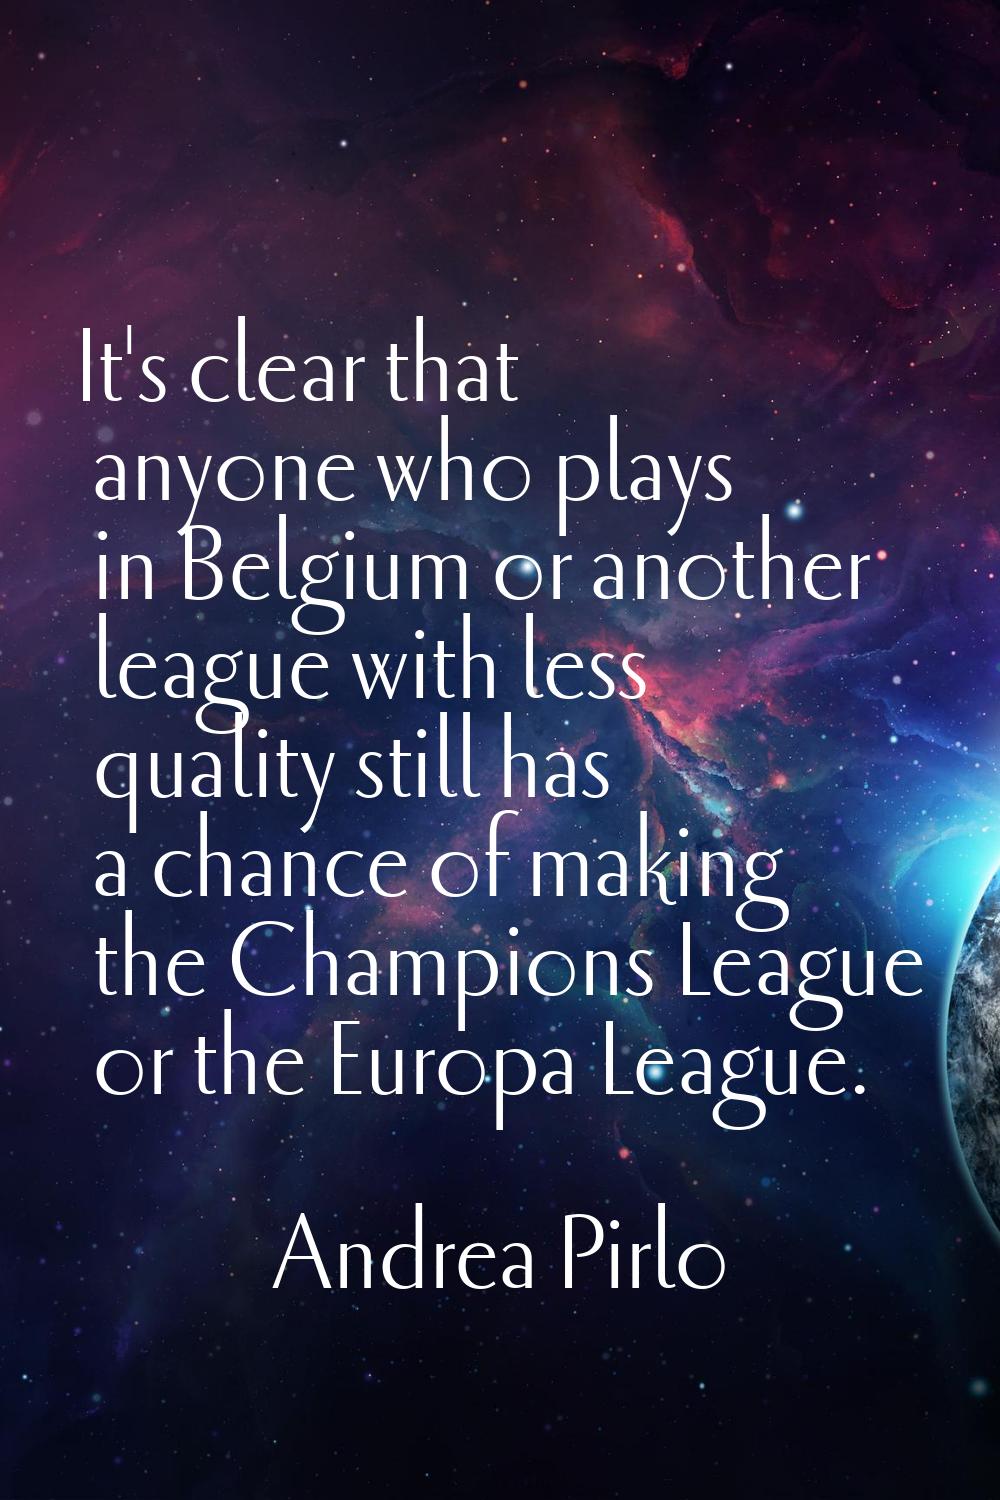 It's clear that anyone who plays in Belgium or another league with less quality still has a chance 